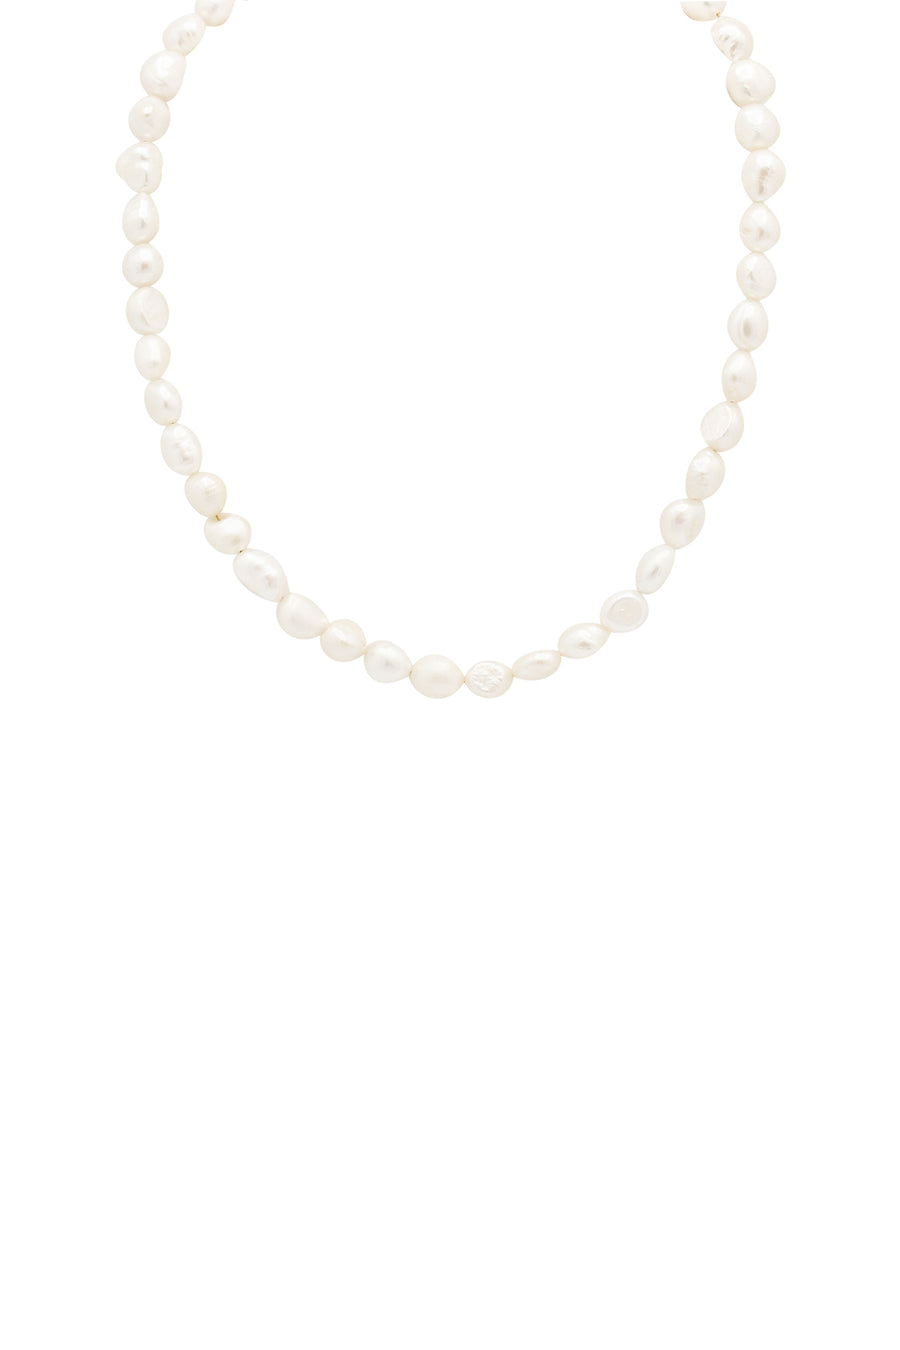 FreshWater Pearl Statement Necklace